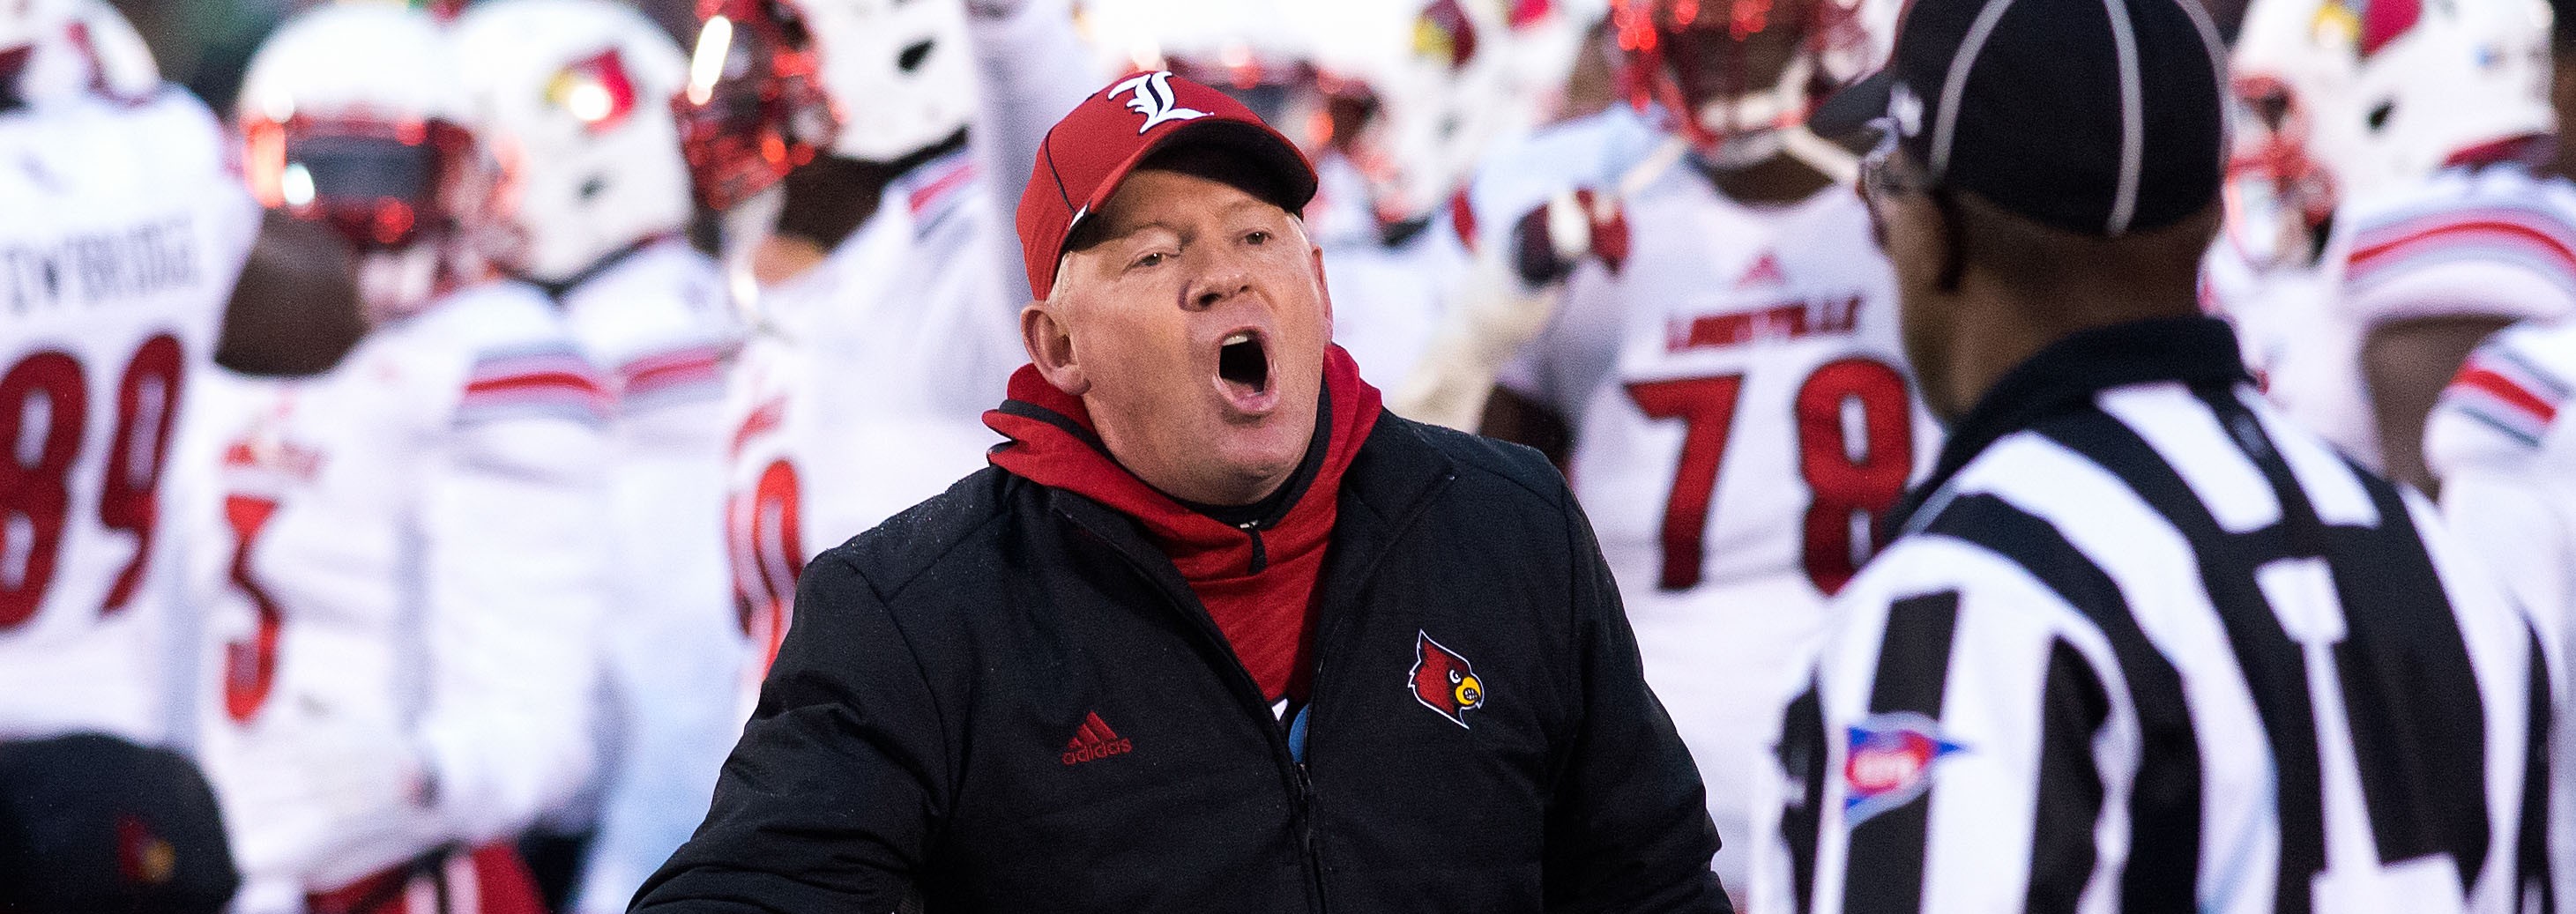 Bobby Petrino Louisville vs. Notre Dame Photo by Adam Creech 11-22-2014 Fitted